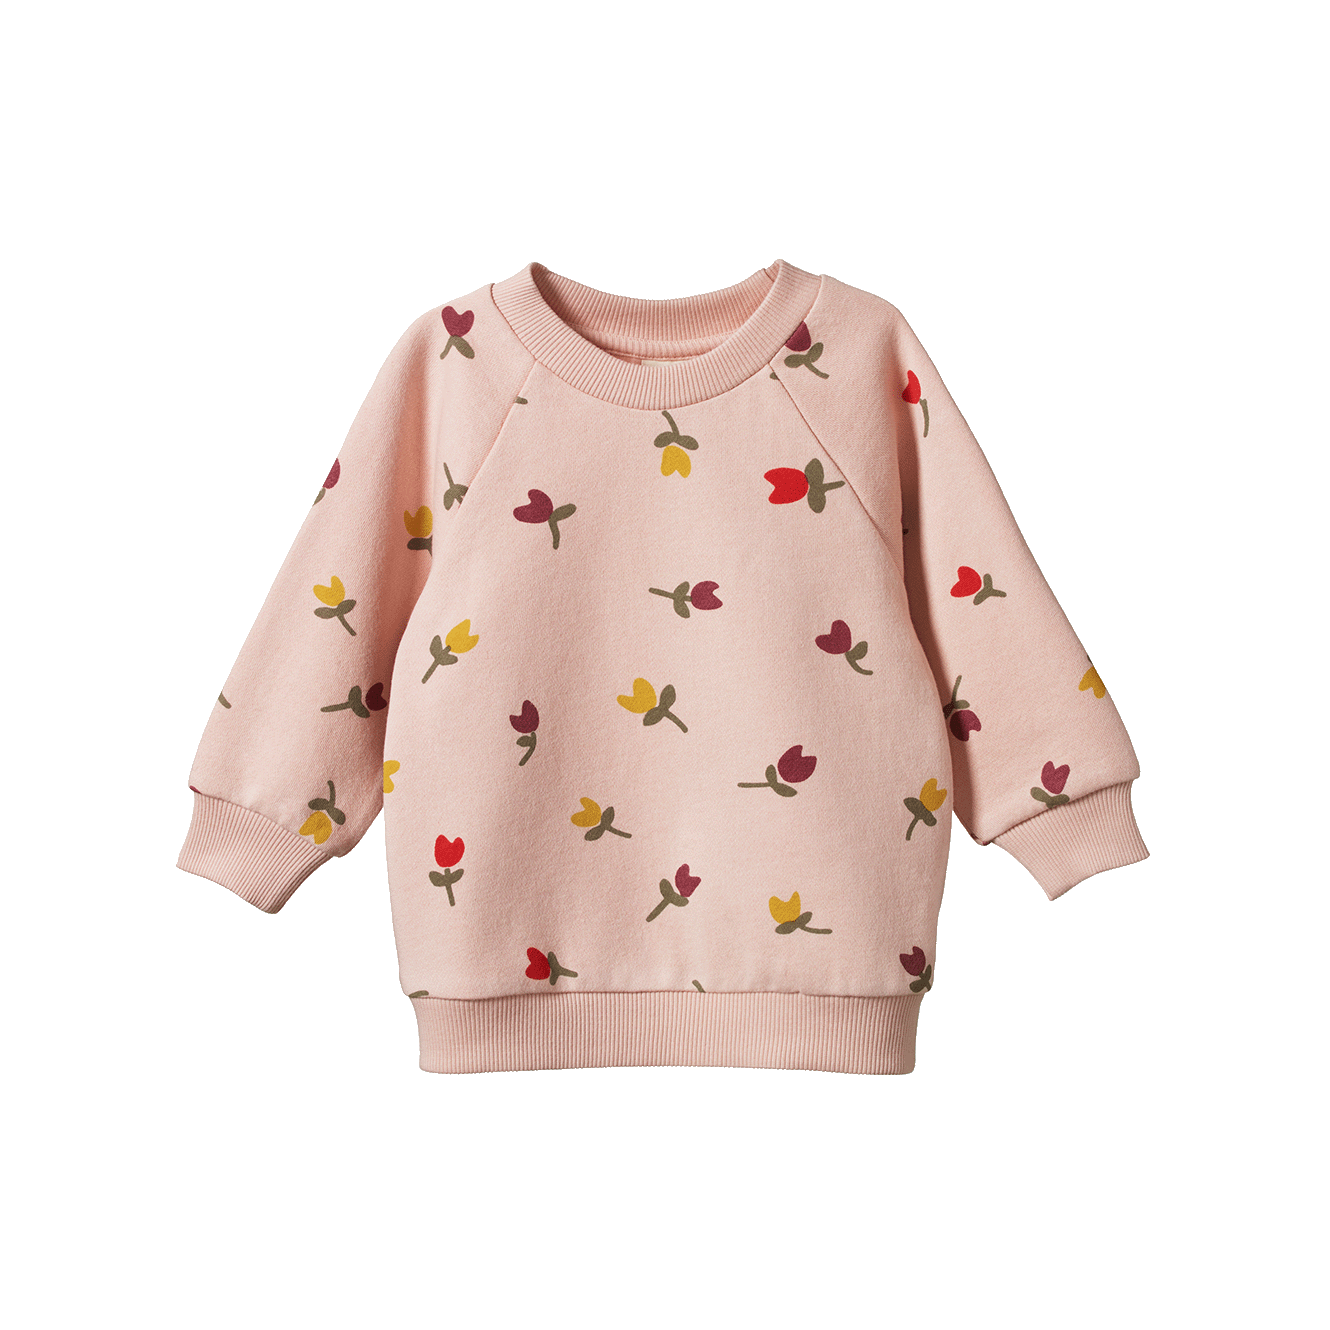 Emerson Sweater - Rose Dust Tulips